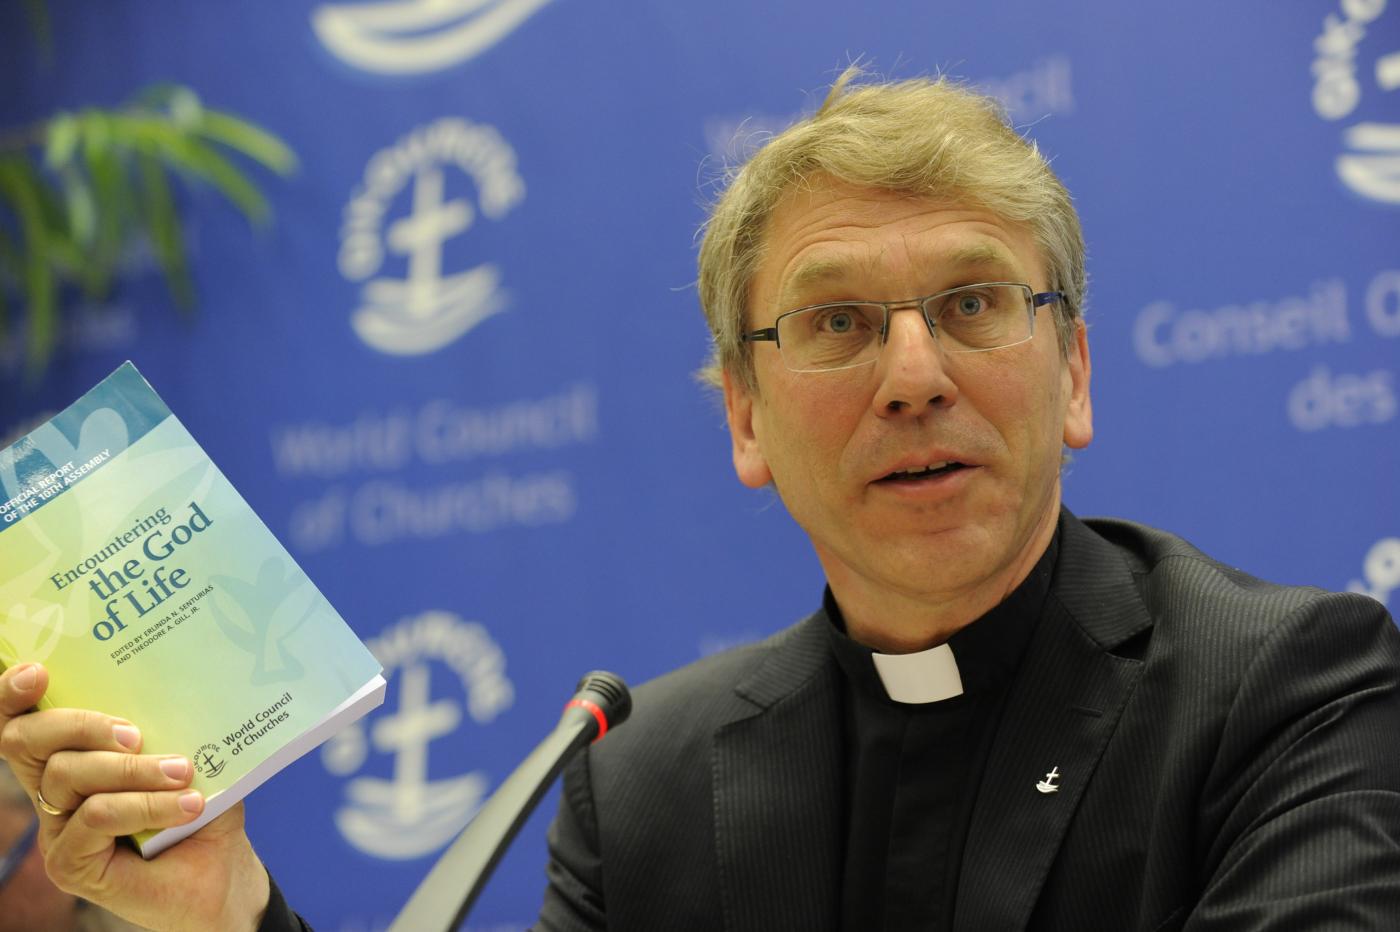 WCC general secretary Rev. Dr Olav Fykse Tveit at the WCC Central Committee meeting in Geneva.